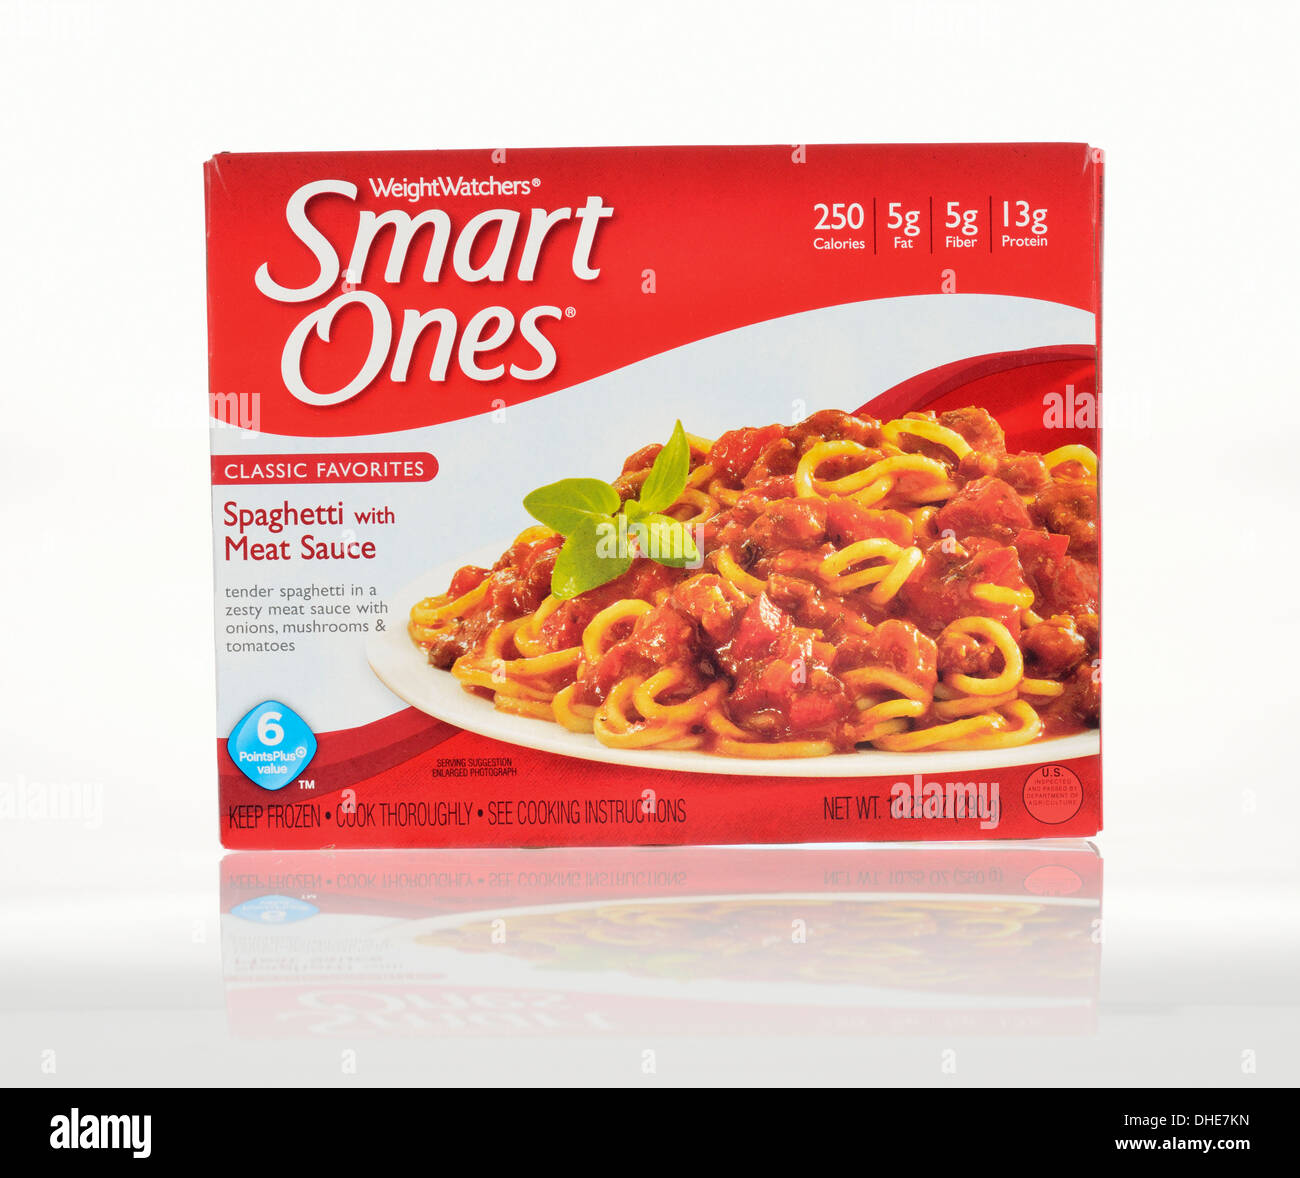 Unopened Weight Watchers Smart Ones frozen Spaghetti with Meat Sauce ready meal dinner in packaging on white background, cutout. Stock Photo